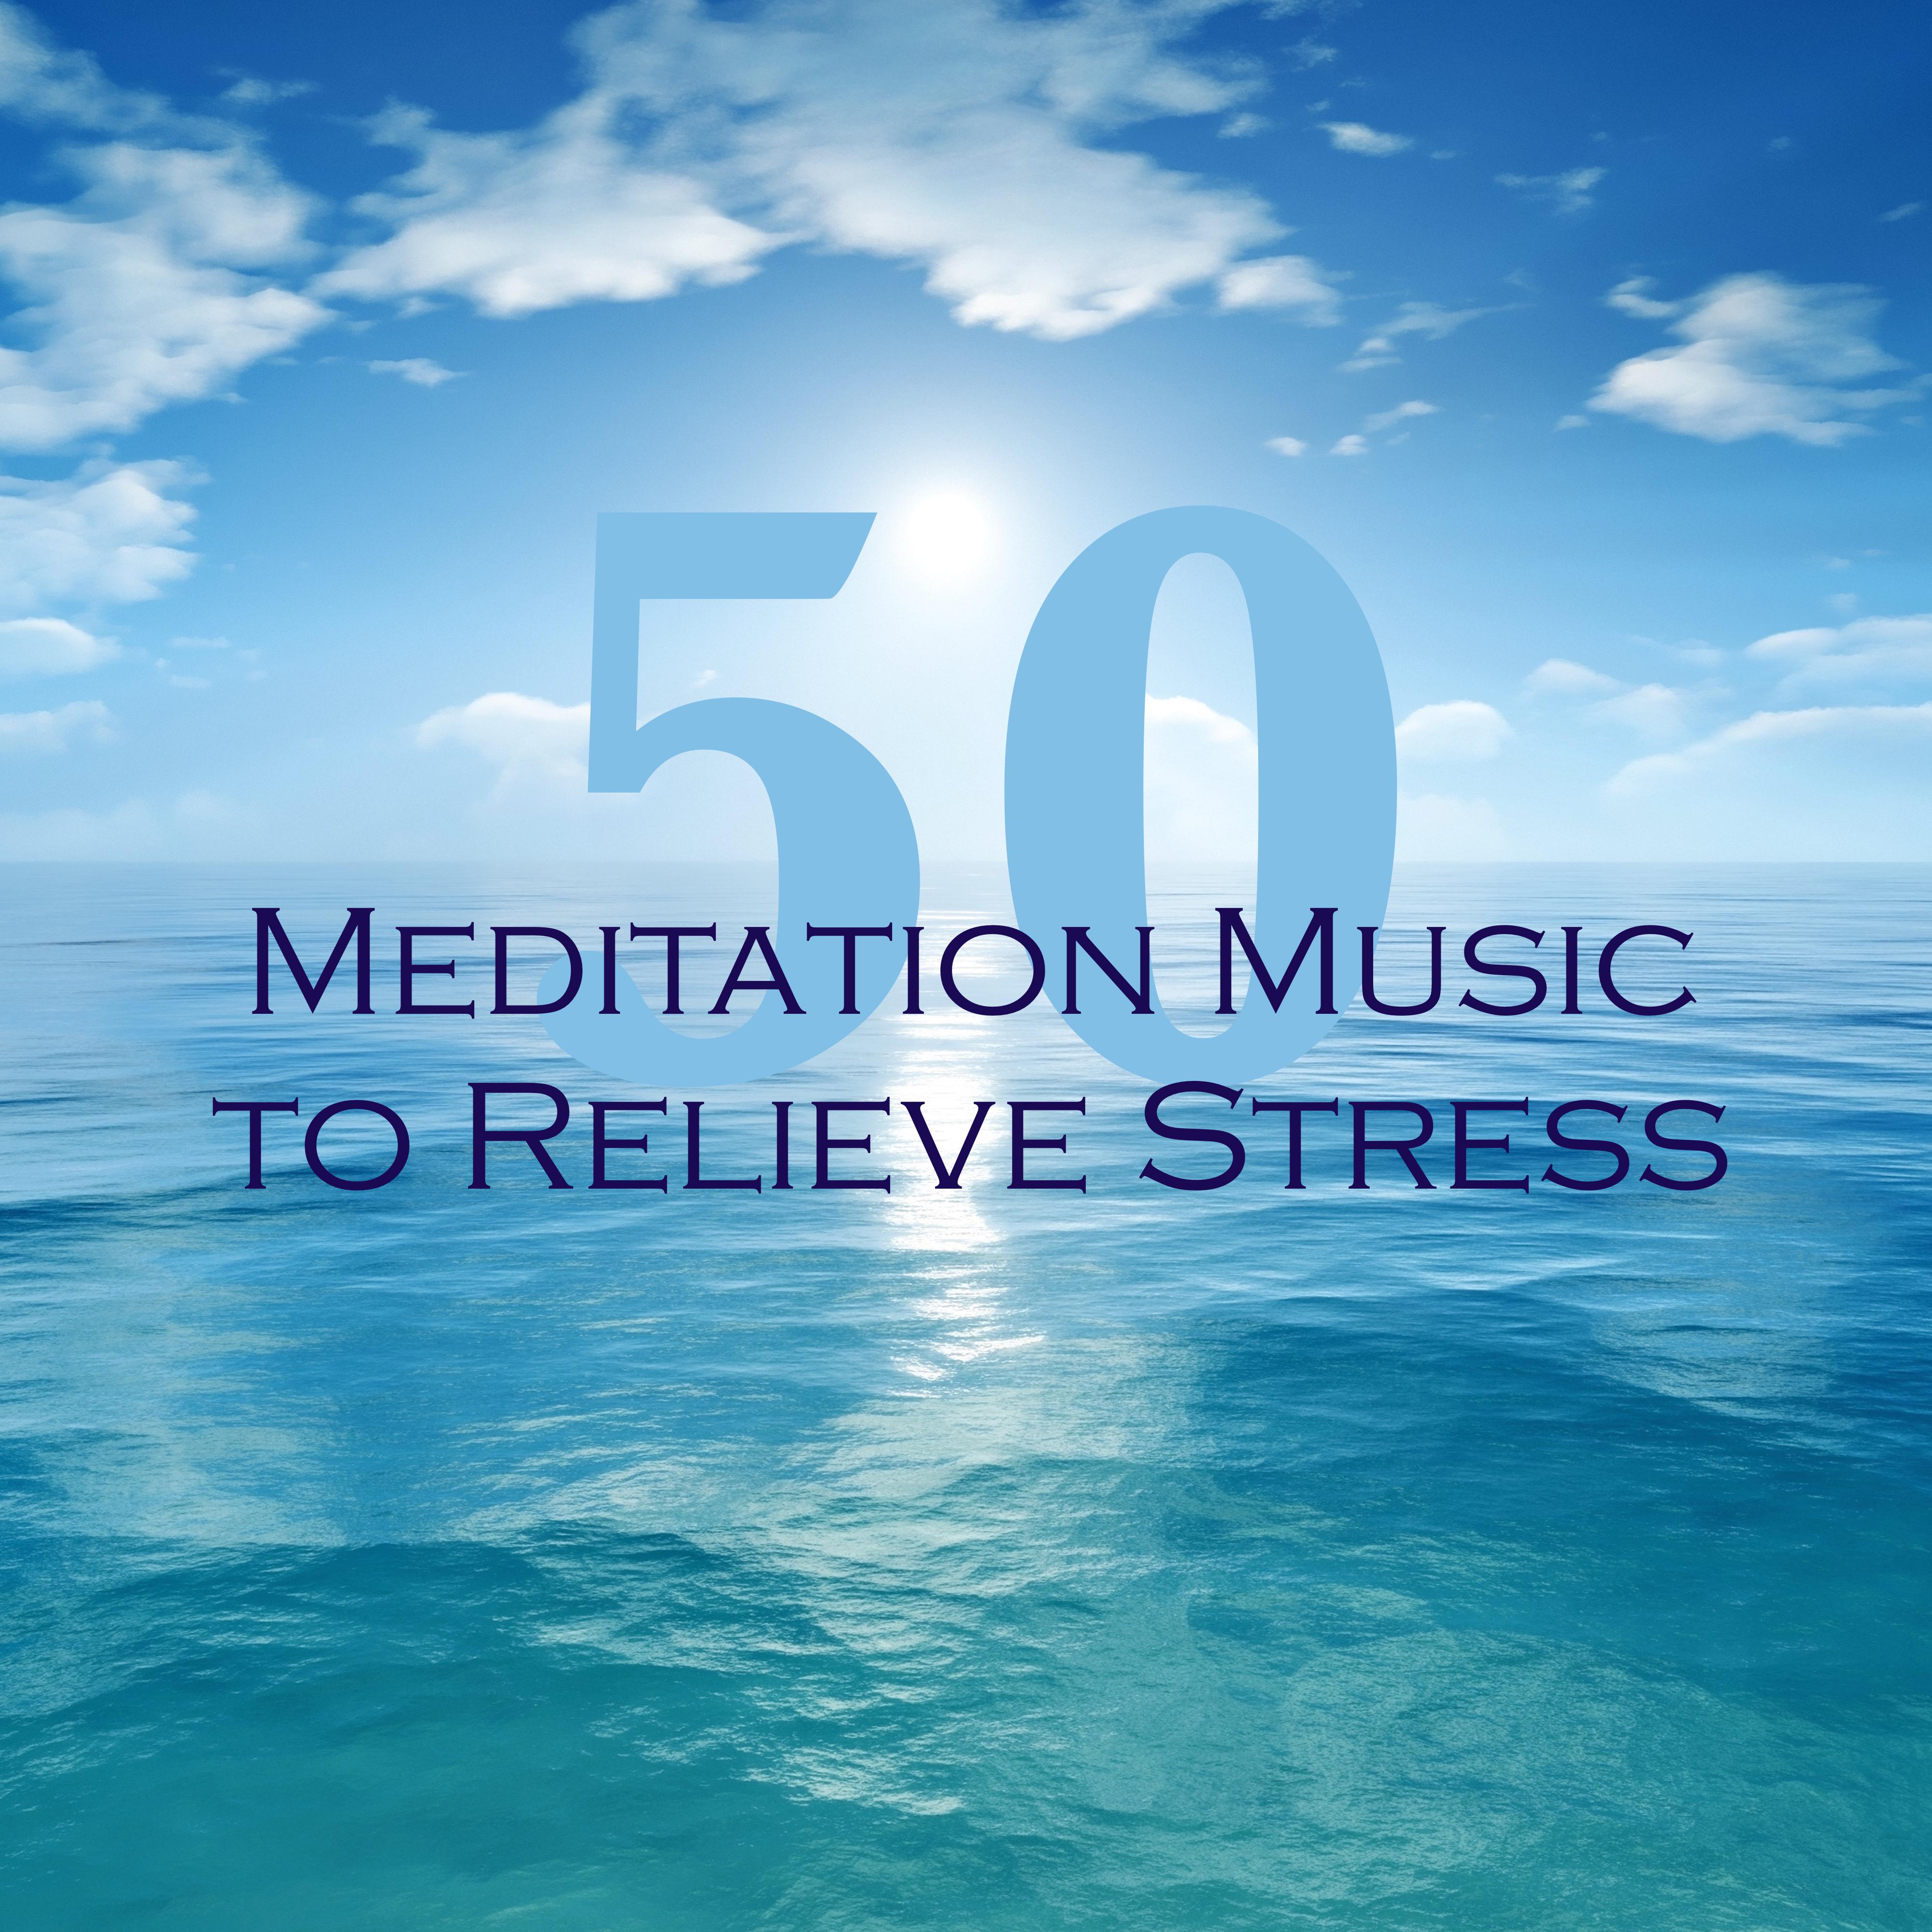 50 Meditation Music to Relieve Stress - Relaxing Soundscapes and Healing Soothing Music for Guided Imagery and Mindfulness Exercises